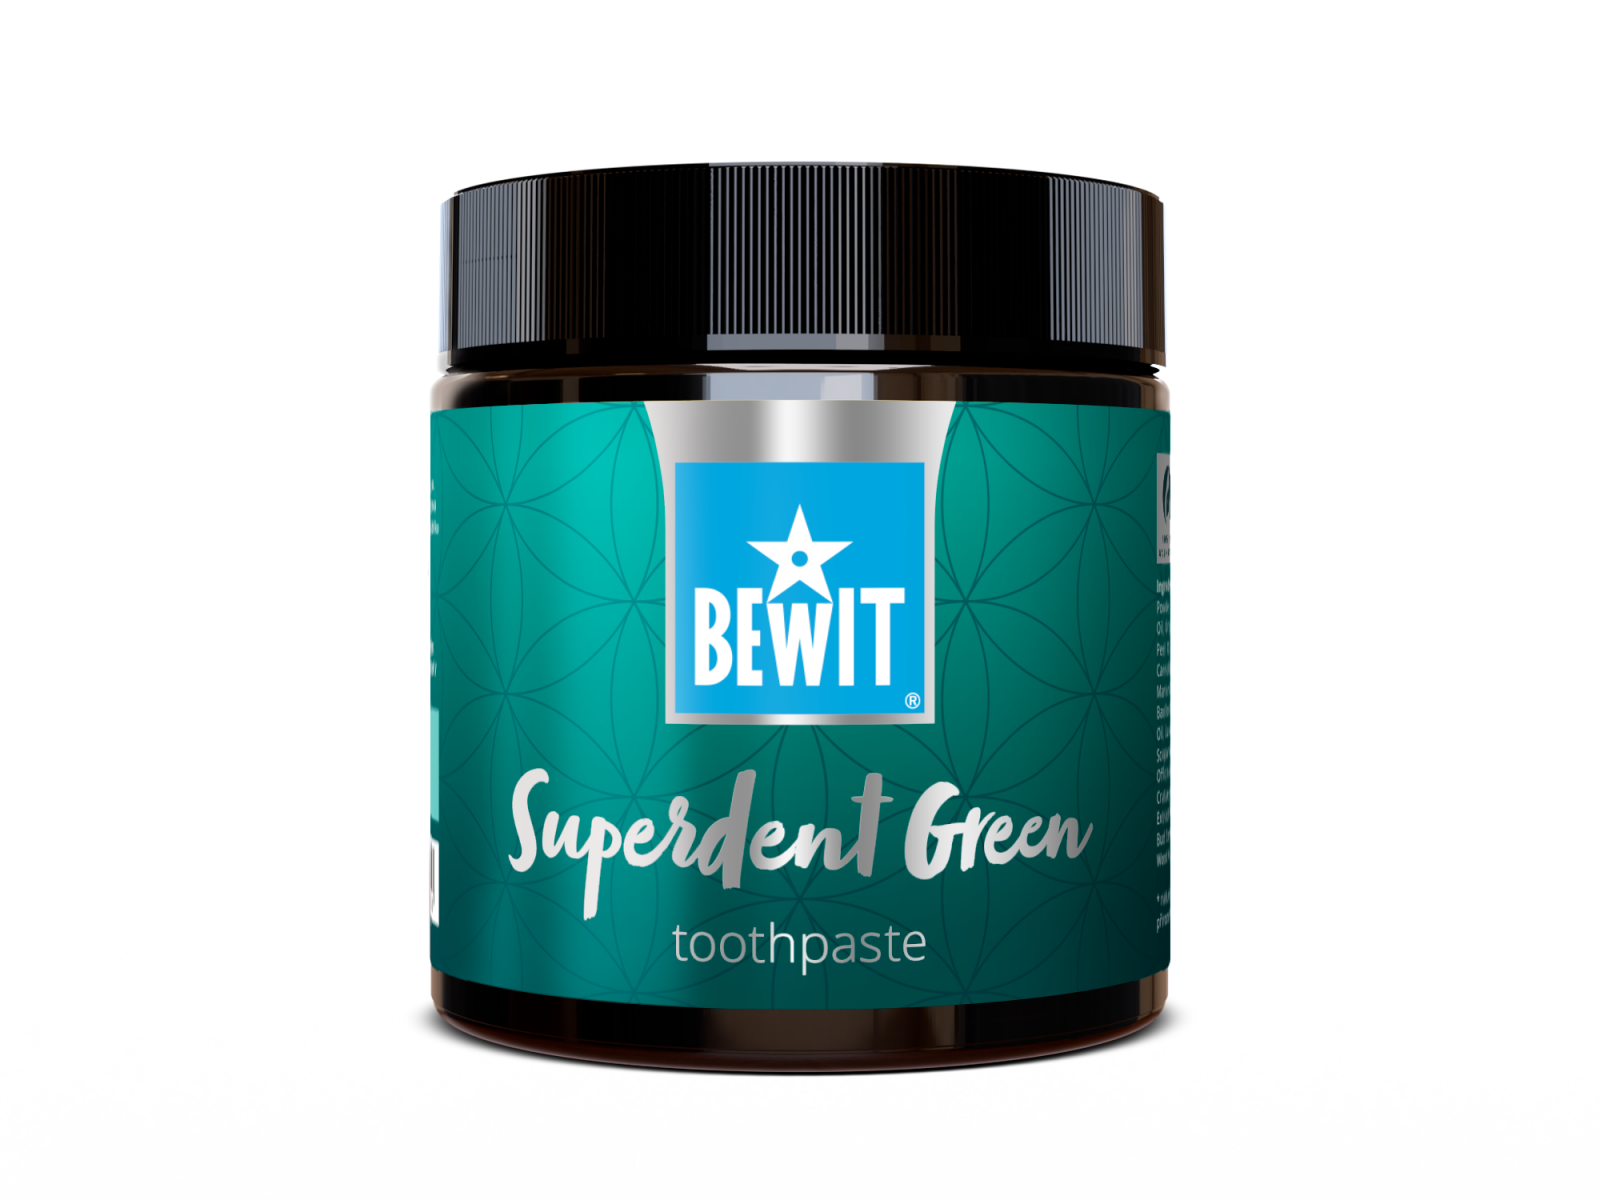 BEWIT Superdent Green - Caring Toothpaste with Spirulina - 1